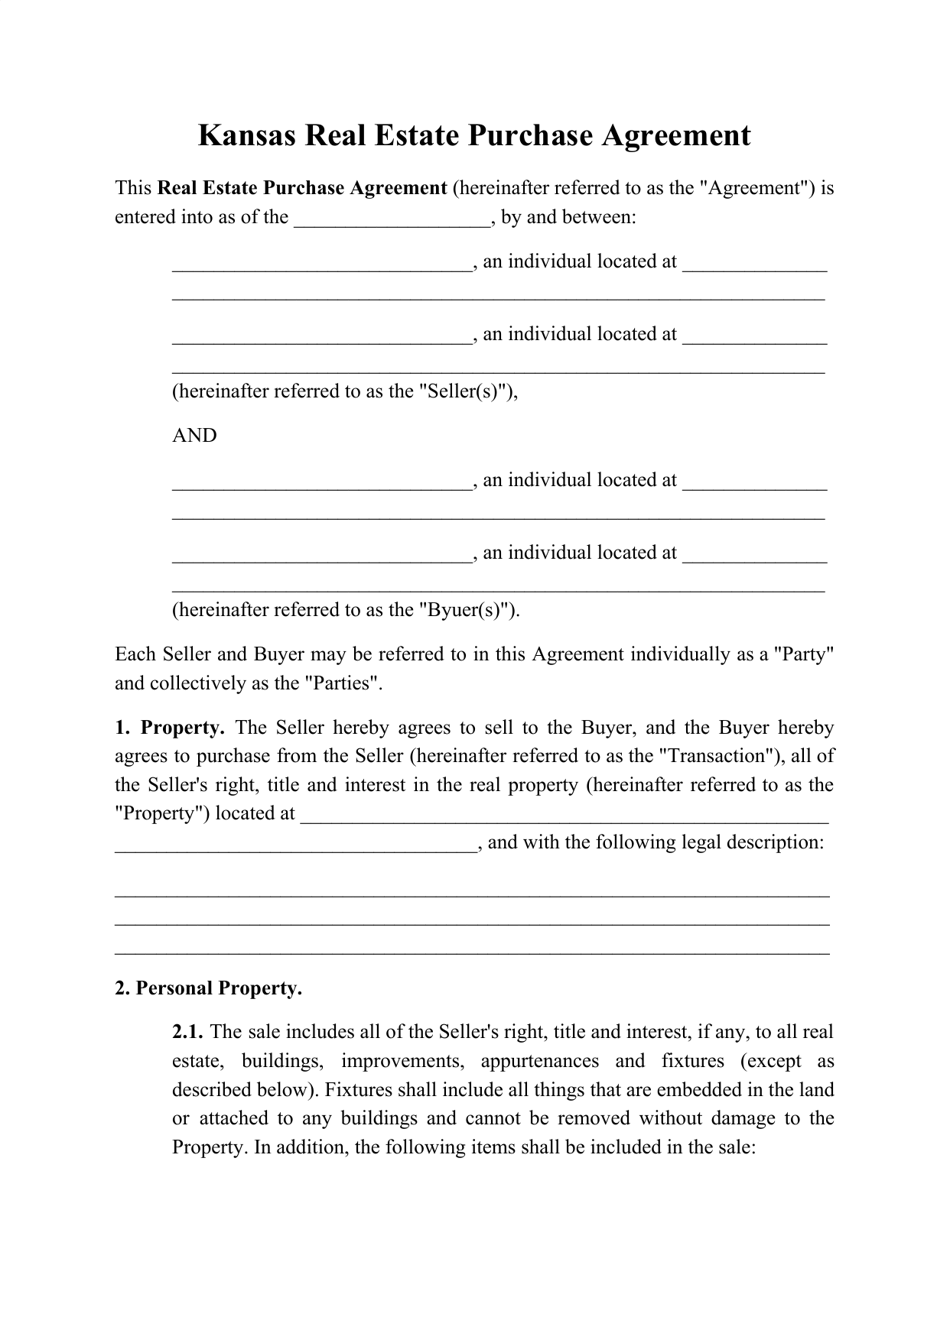 Real Estate Purchase Agreement Template - Kansas, Page 1